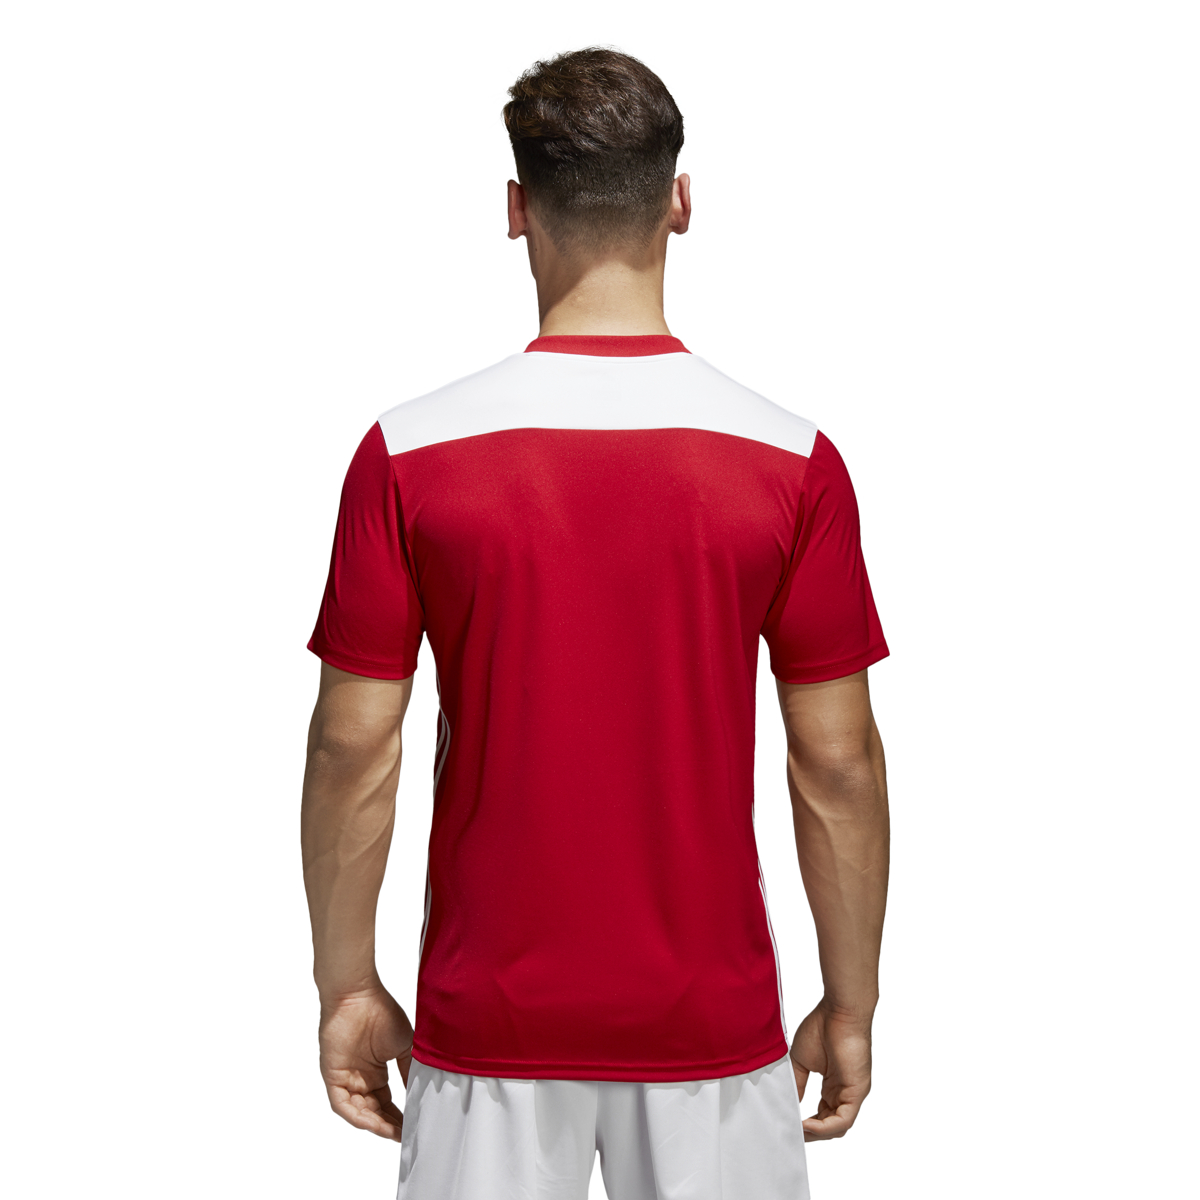 Adidas Mens Soccer Regista 18 Jersey Adidas - Ships Directly From Adidas - image 2 of 6